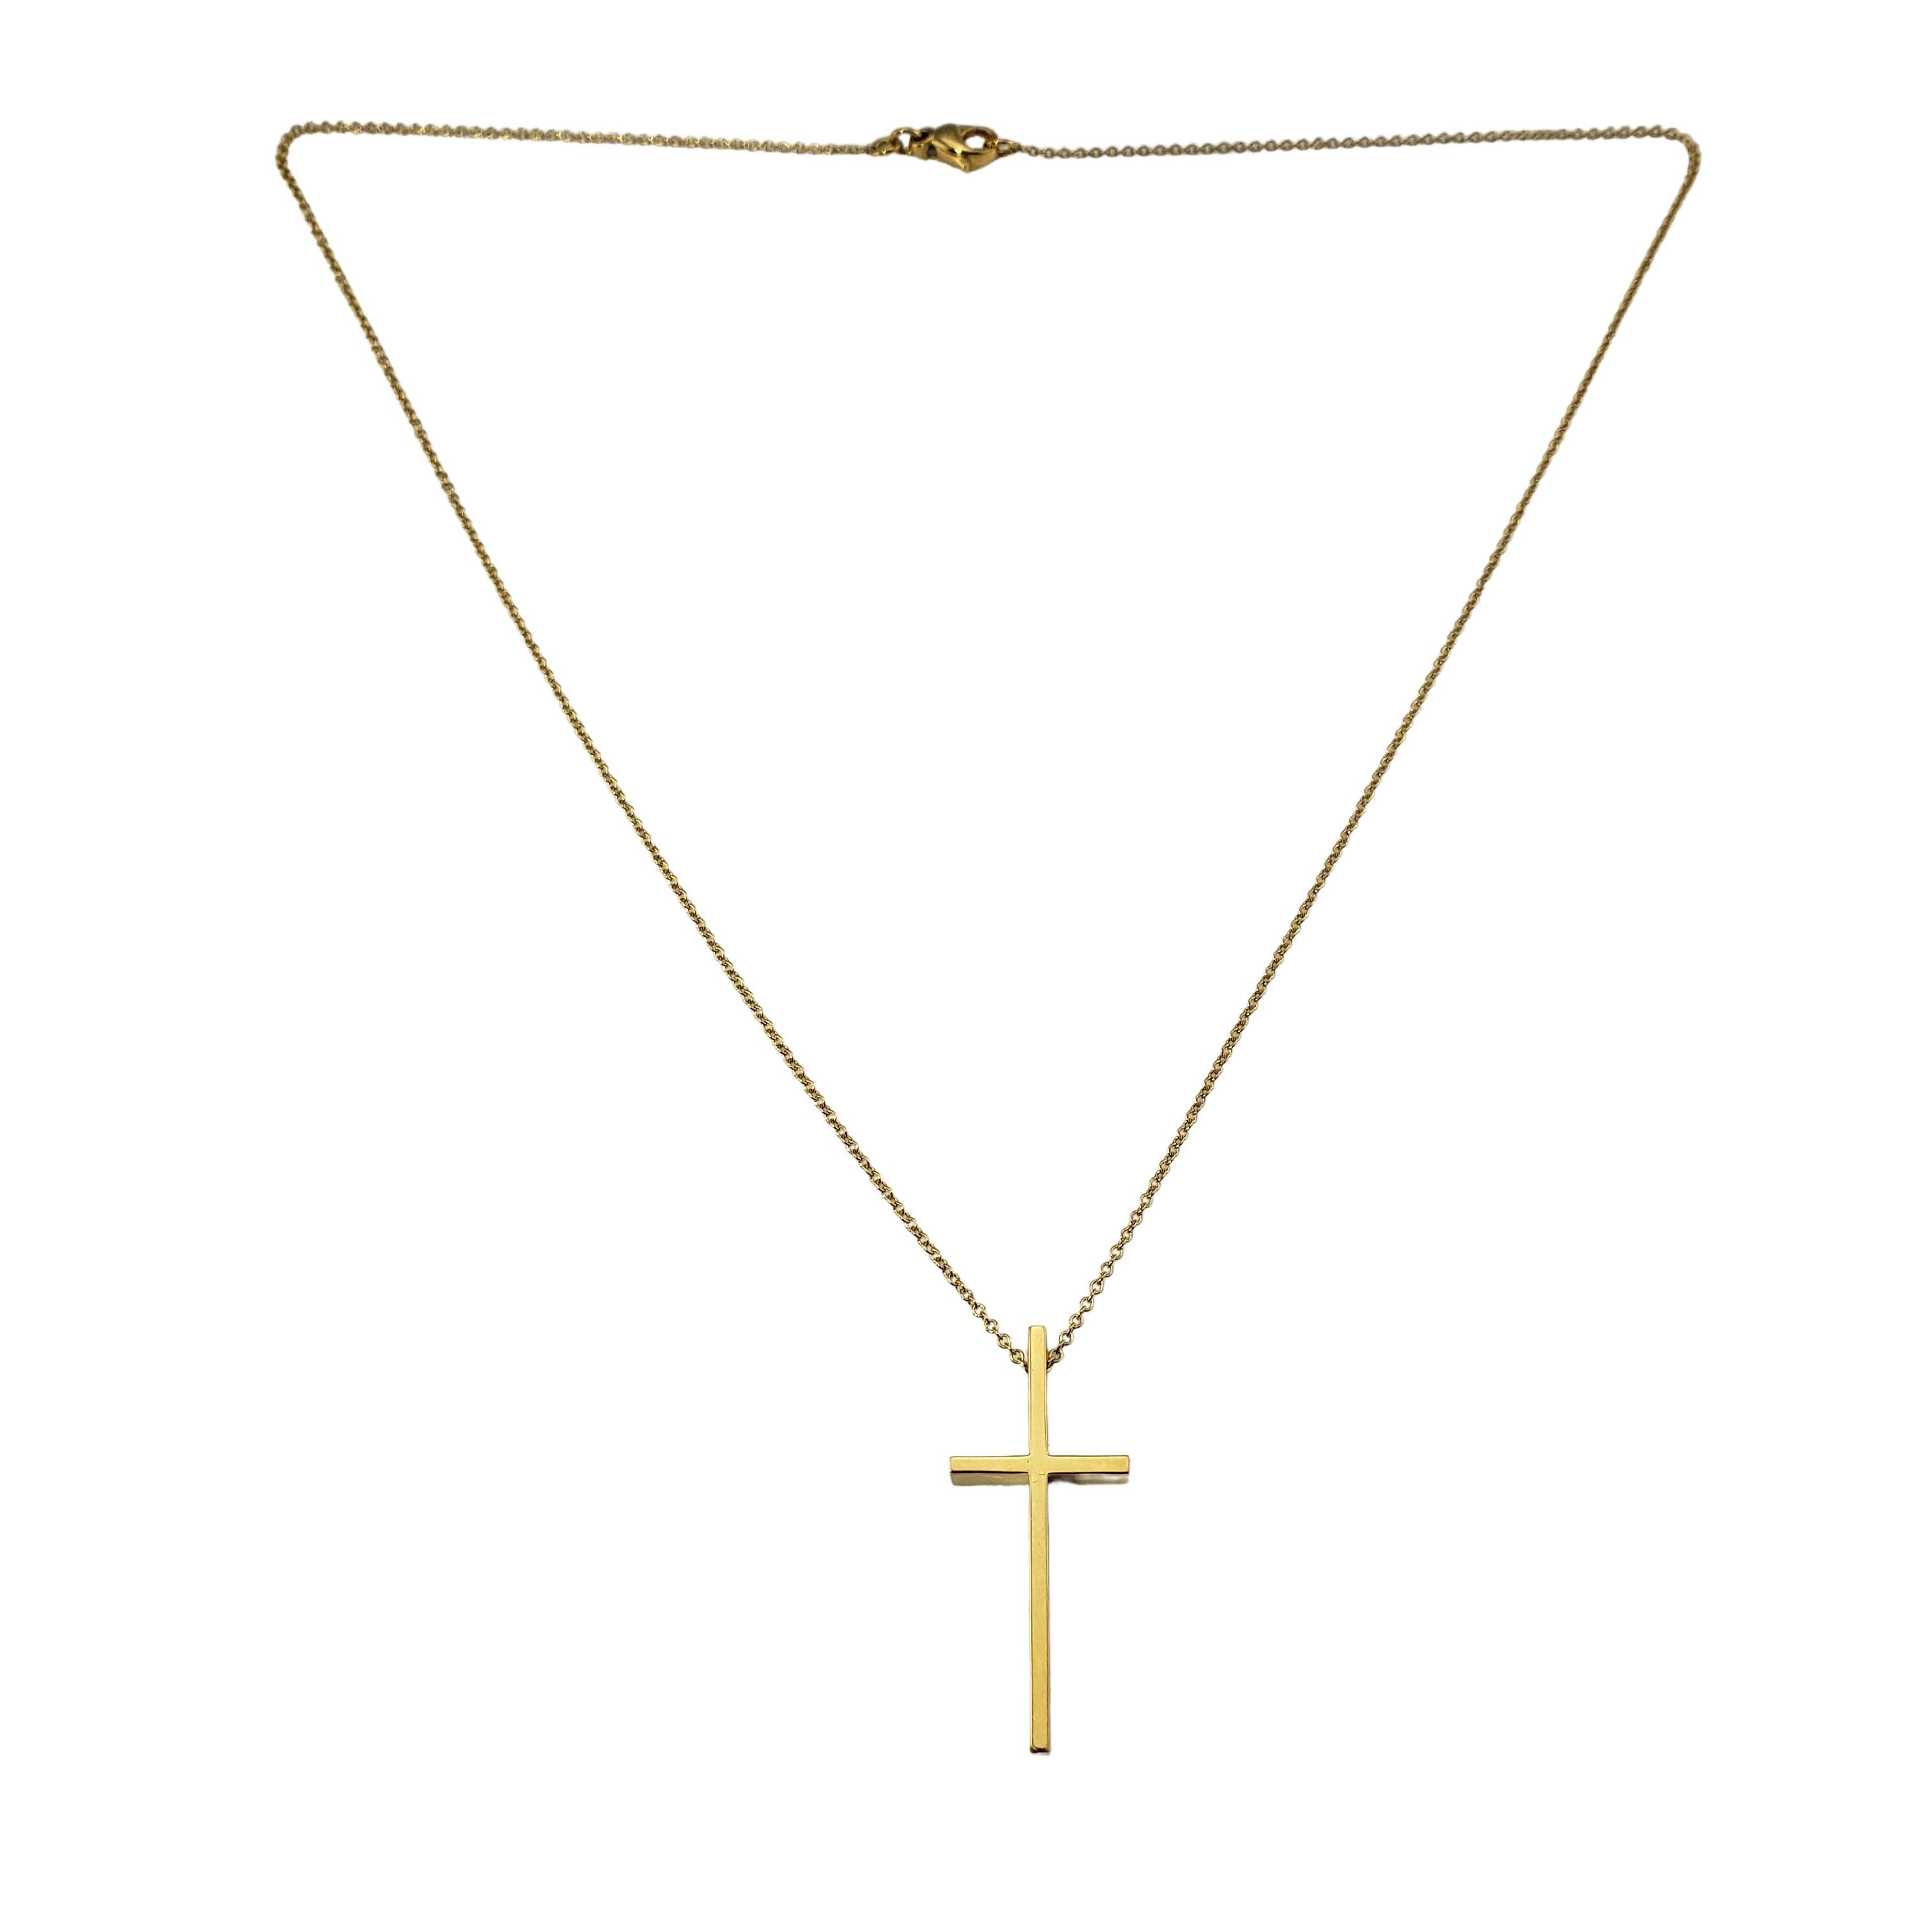 Vintage Tiffany & Co. 18 Karat Yellow Gold Cross Pendant Necklace-

This elegant Tiffany & Co. cross pendant is crafted in beautifully detailed 18K yellow gold; suspends from a classic 18K necklace.  

Size: 31 mm x 14 mm (pendant)
         17.5